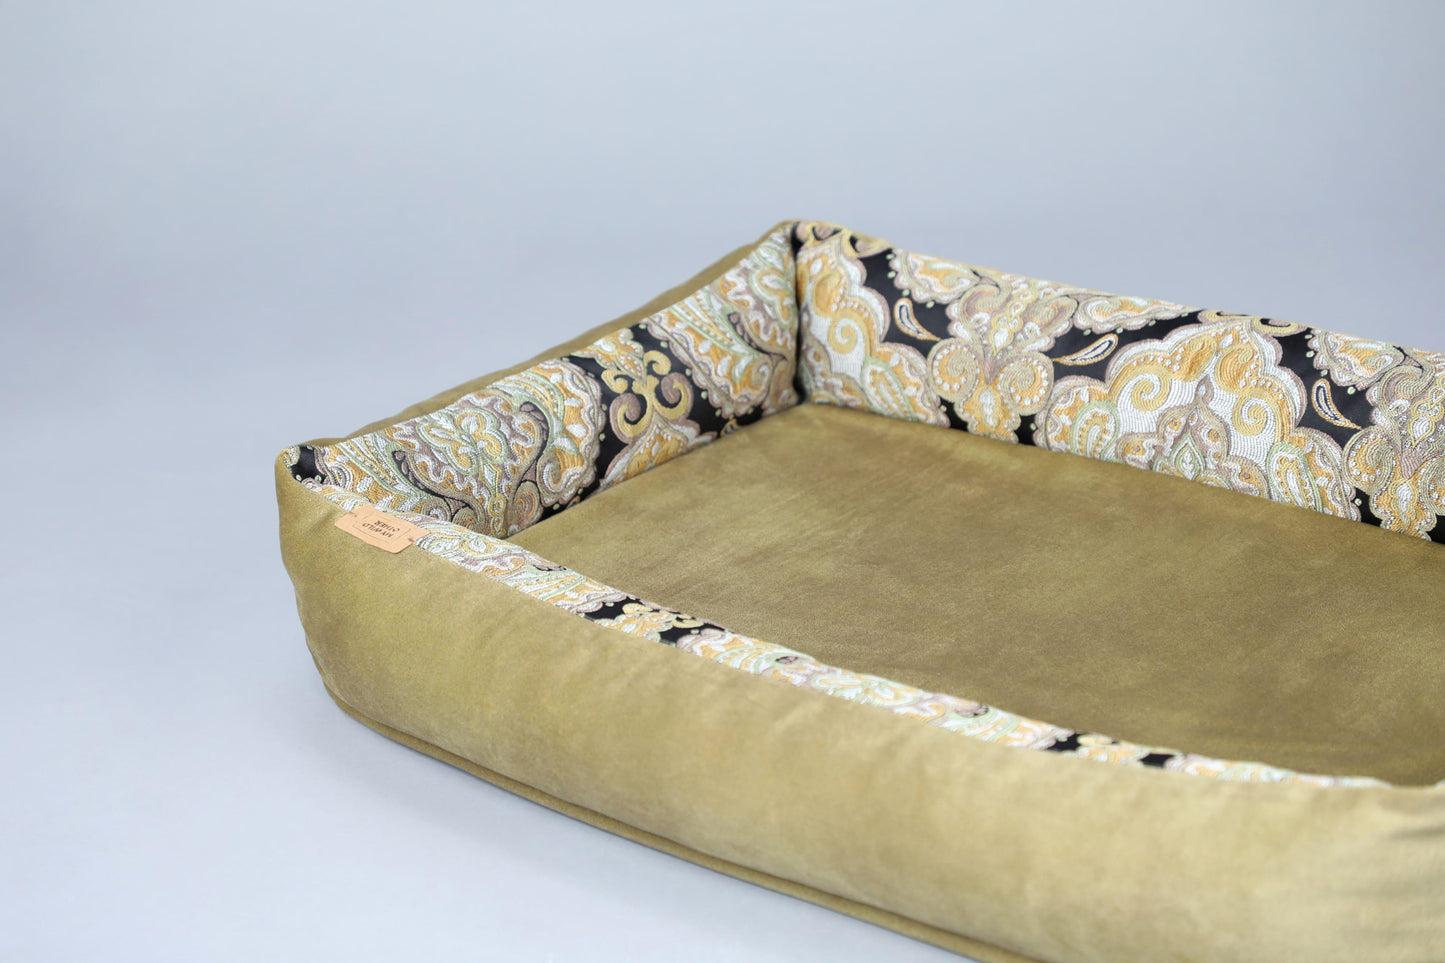 2-sided bohemian style dog bed. DARK KHAKI - handmade in Lithuania by My Wild Other